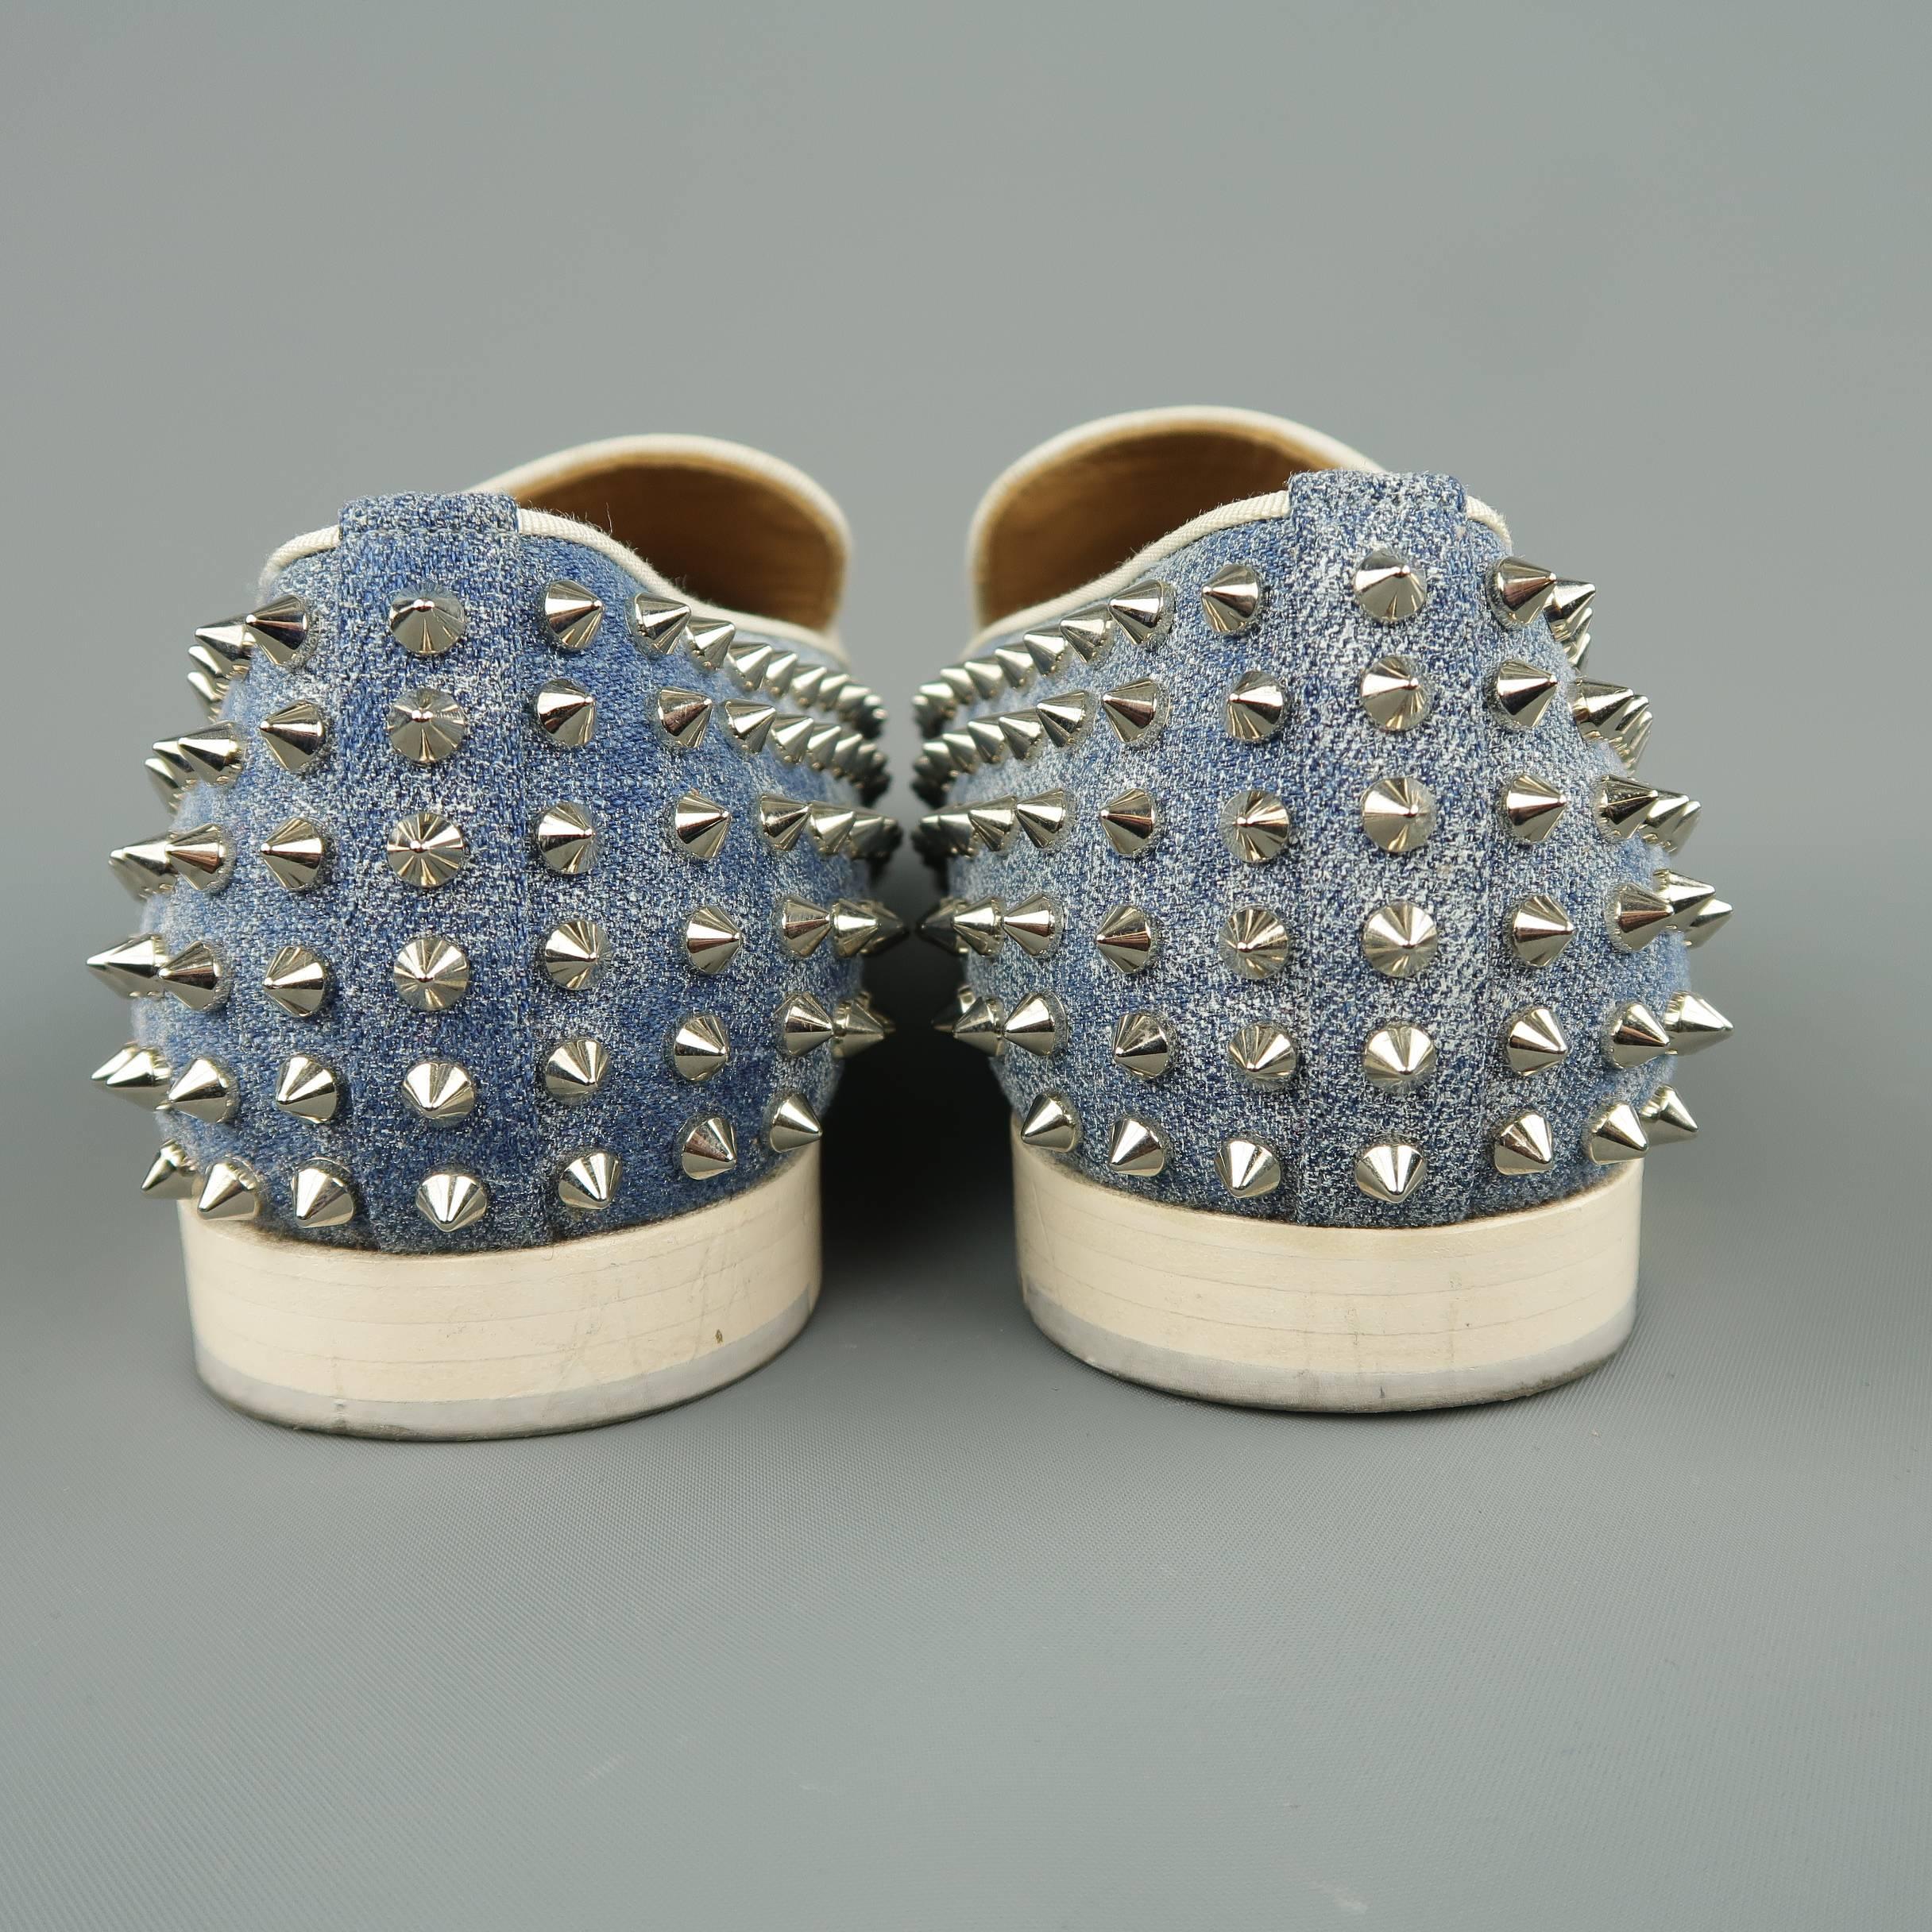 Gray Men's CHRISTIAN LOUBOUTIN Size 9.5 Blue Spiked Denim Rollerboy Spike Loafers